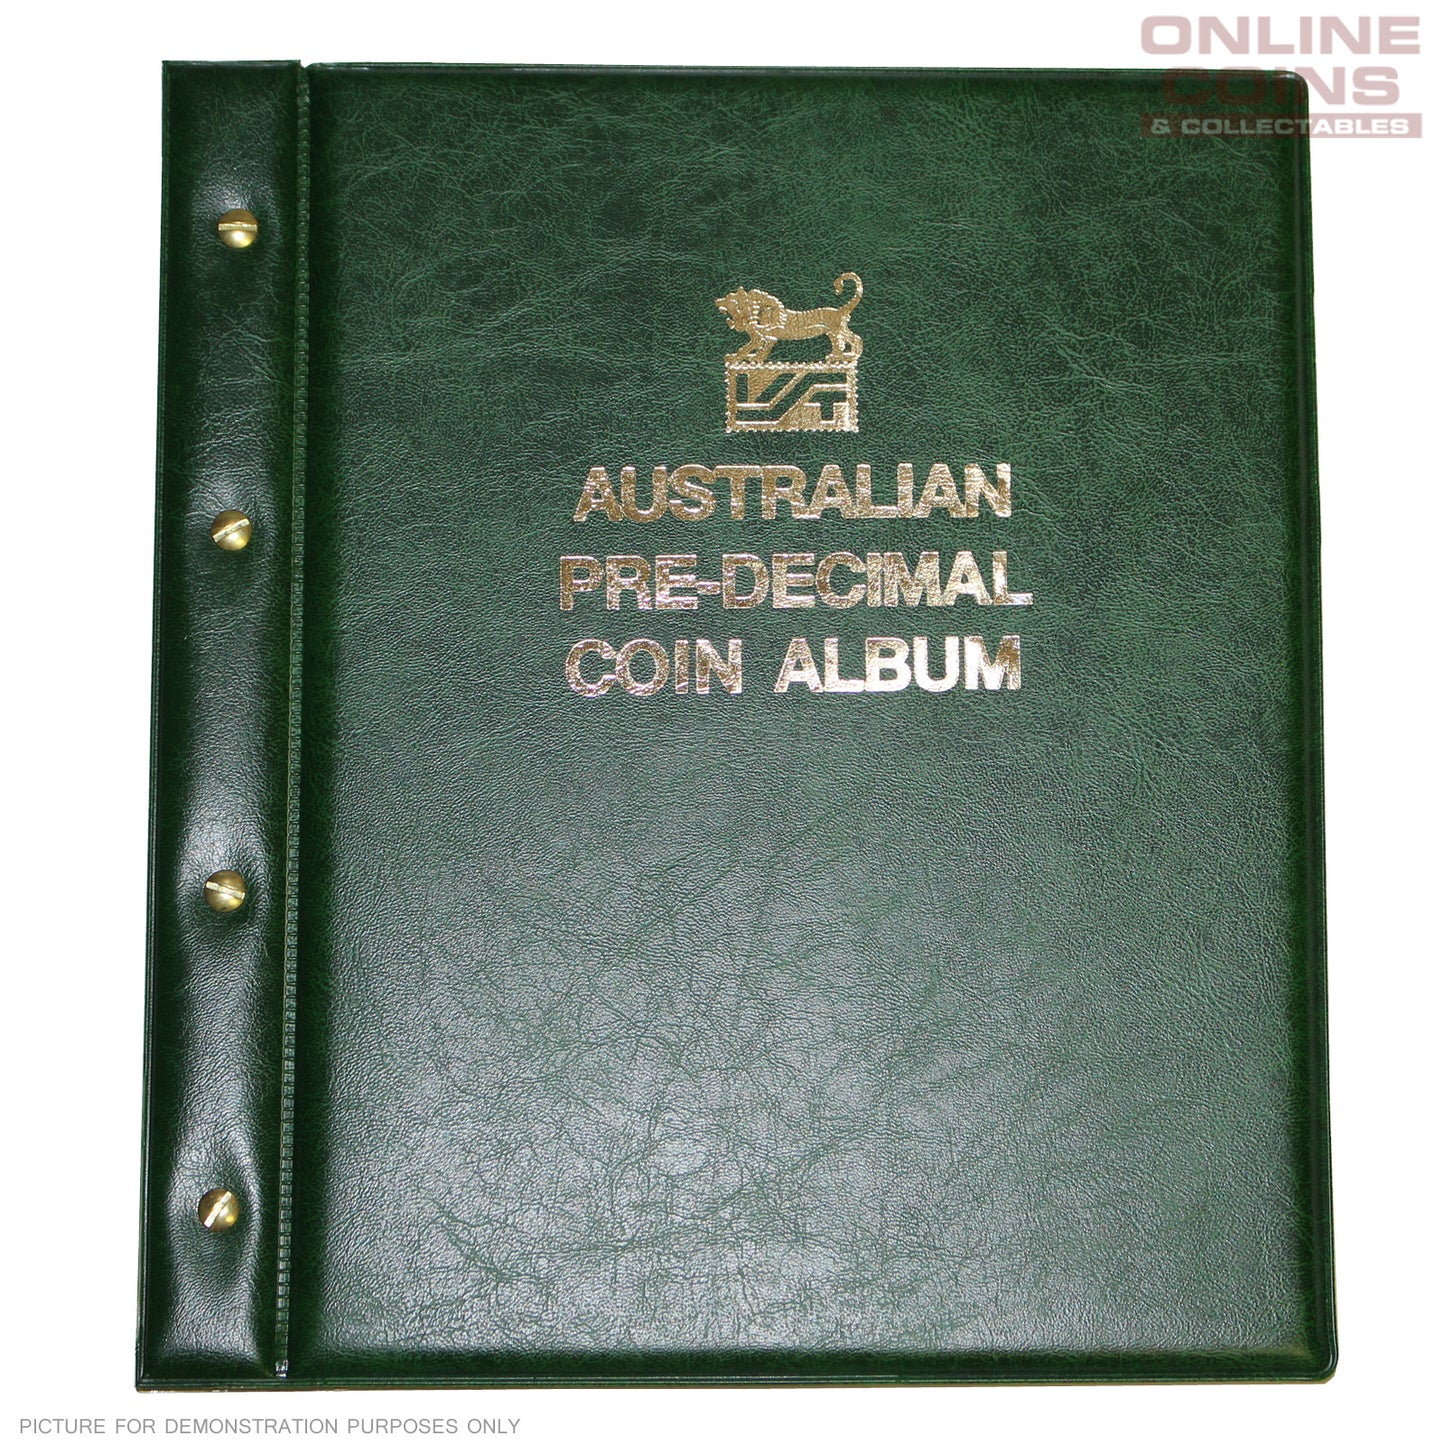 VST Coin Album Padded Leatherette Cover Australia Pre Decimal Pages - GREEN